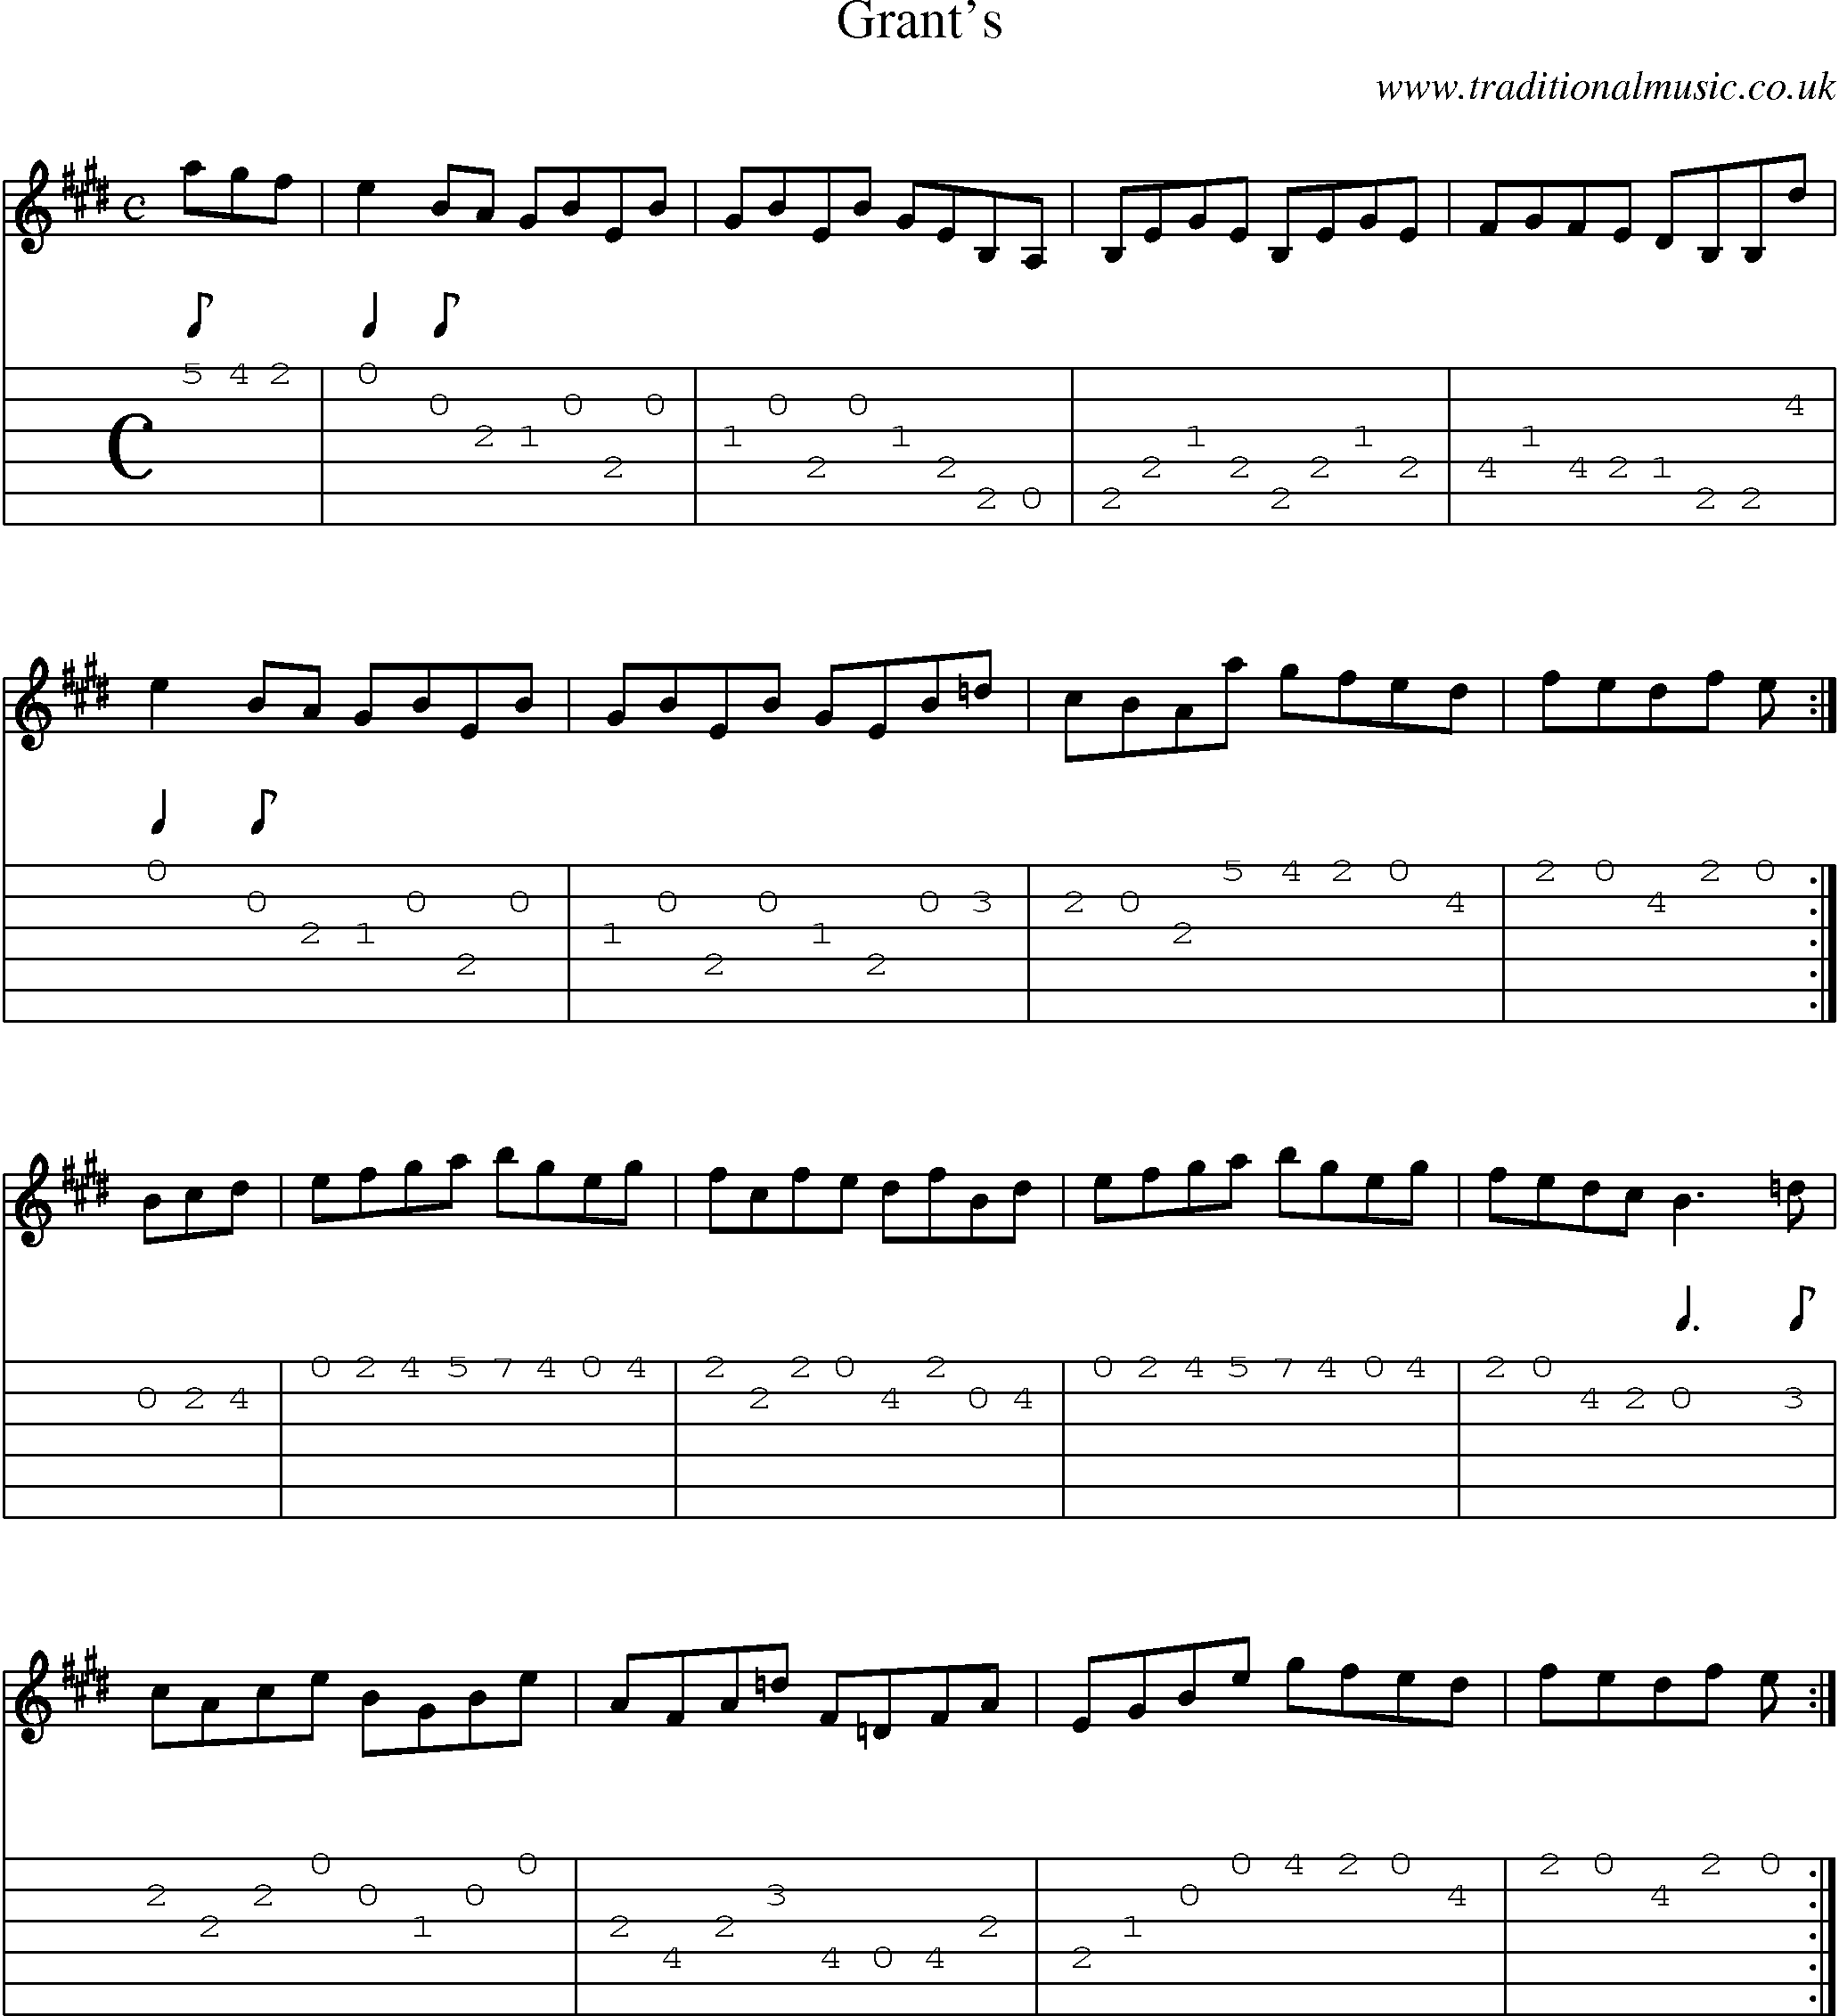 Music Score and Guitar Tabs for Grants